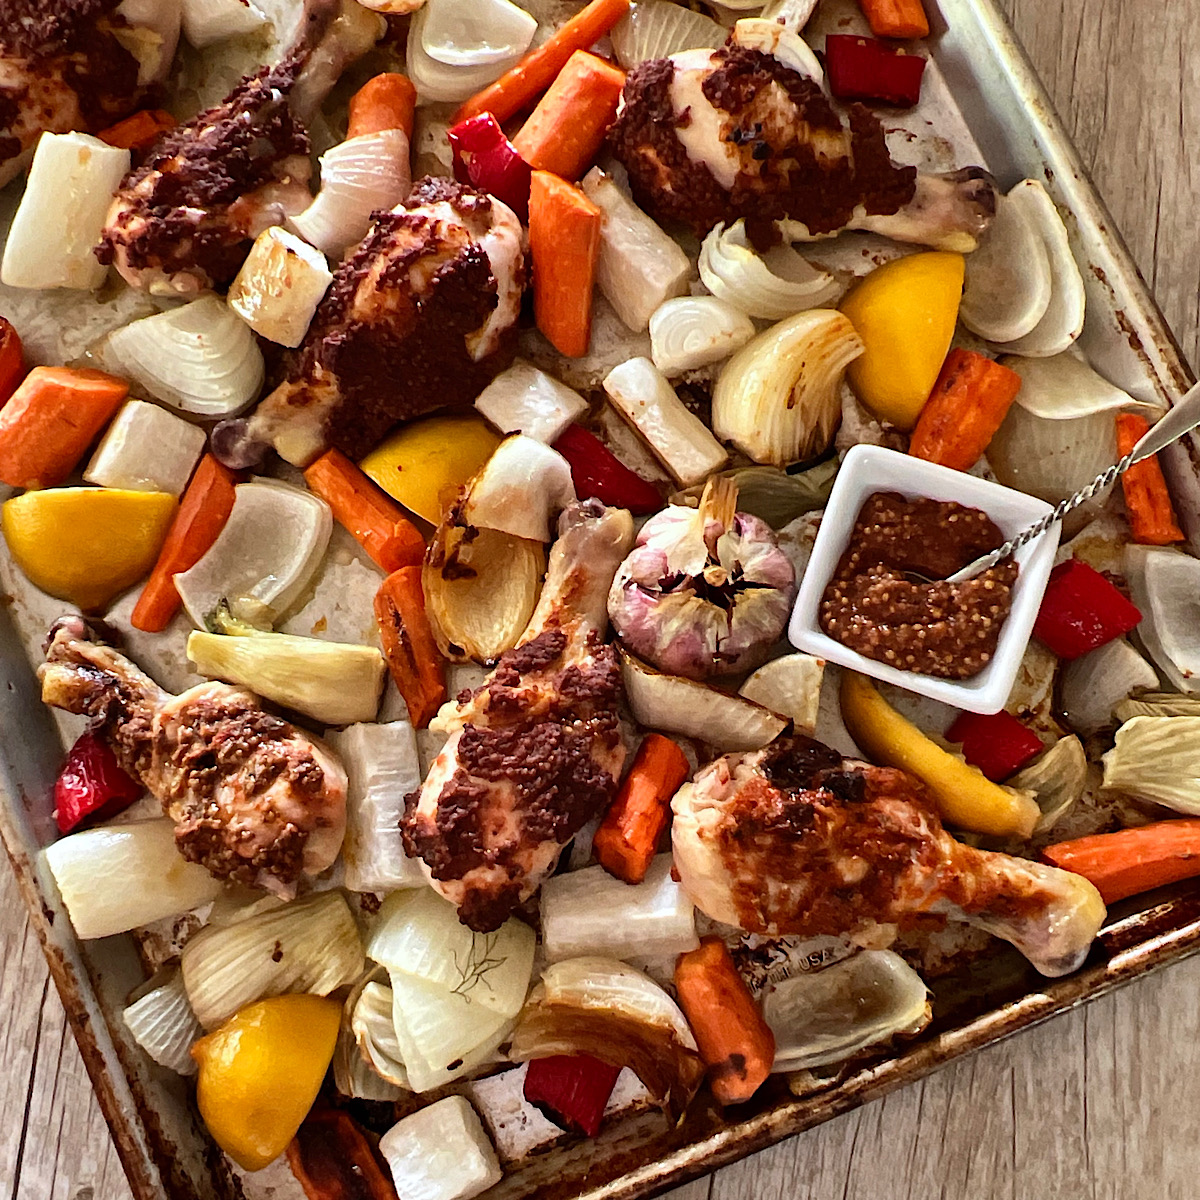 Chicken sheet pan dinner with vegetables and tomato mustard rub.